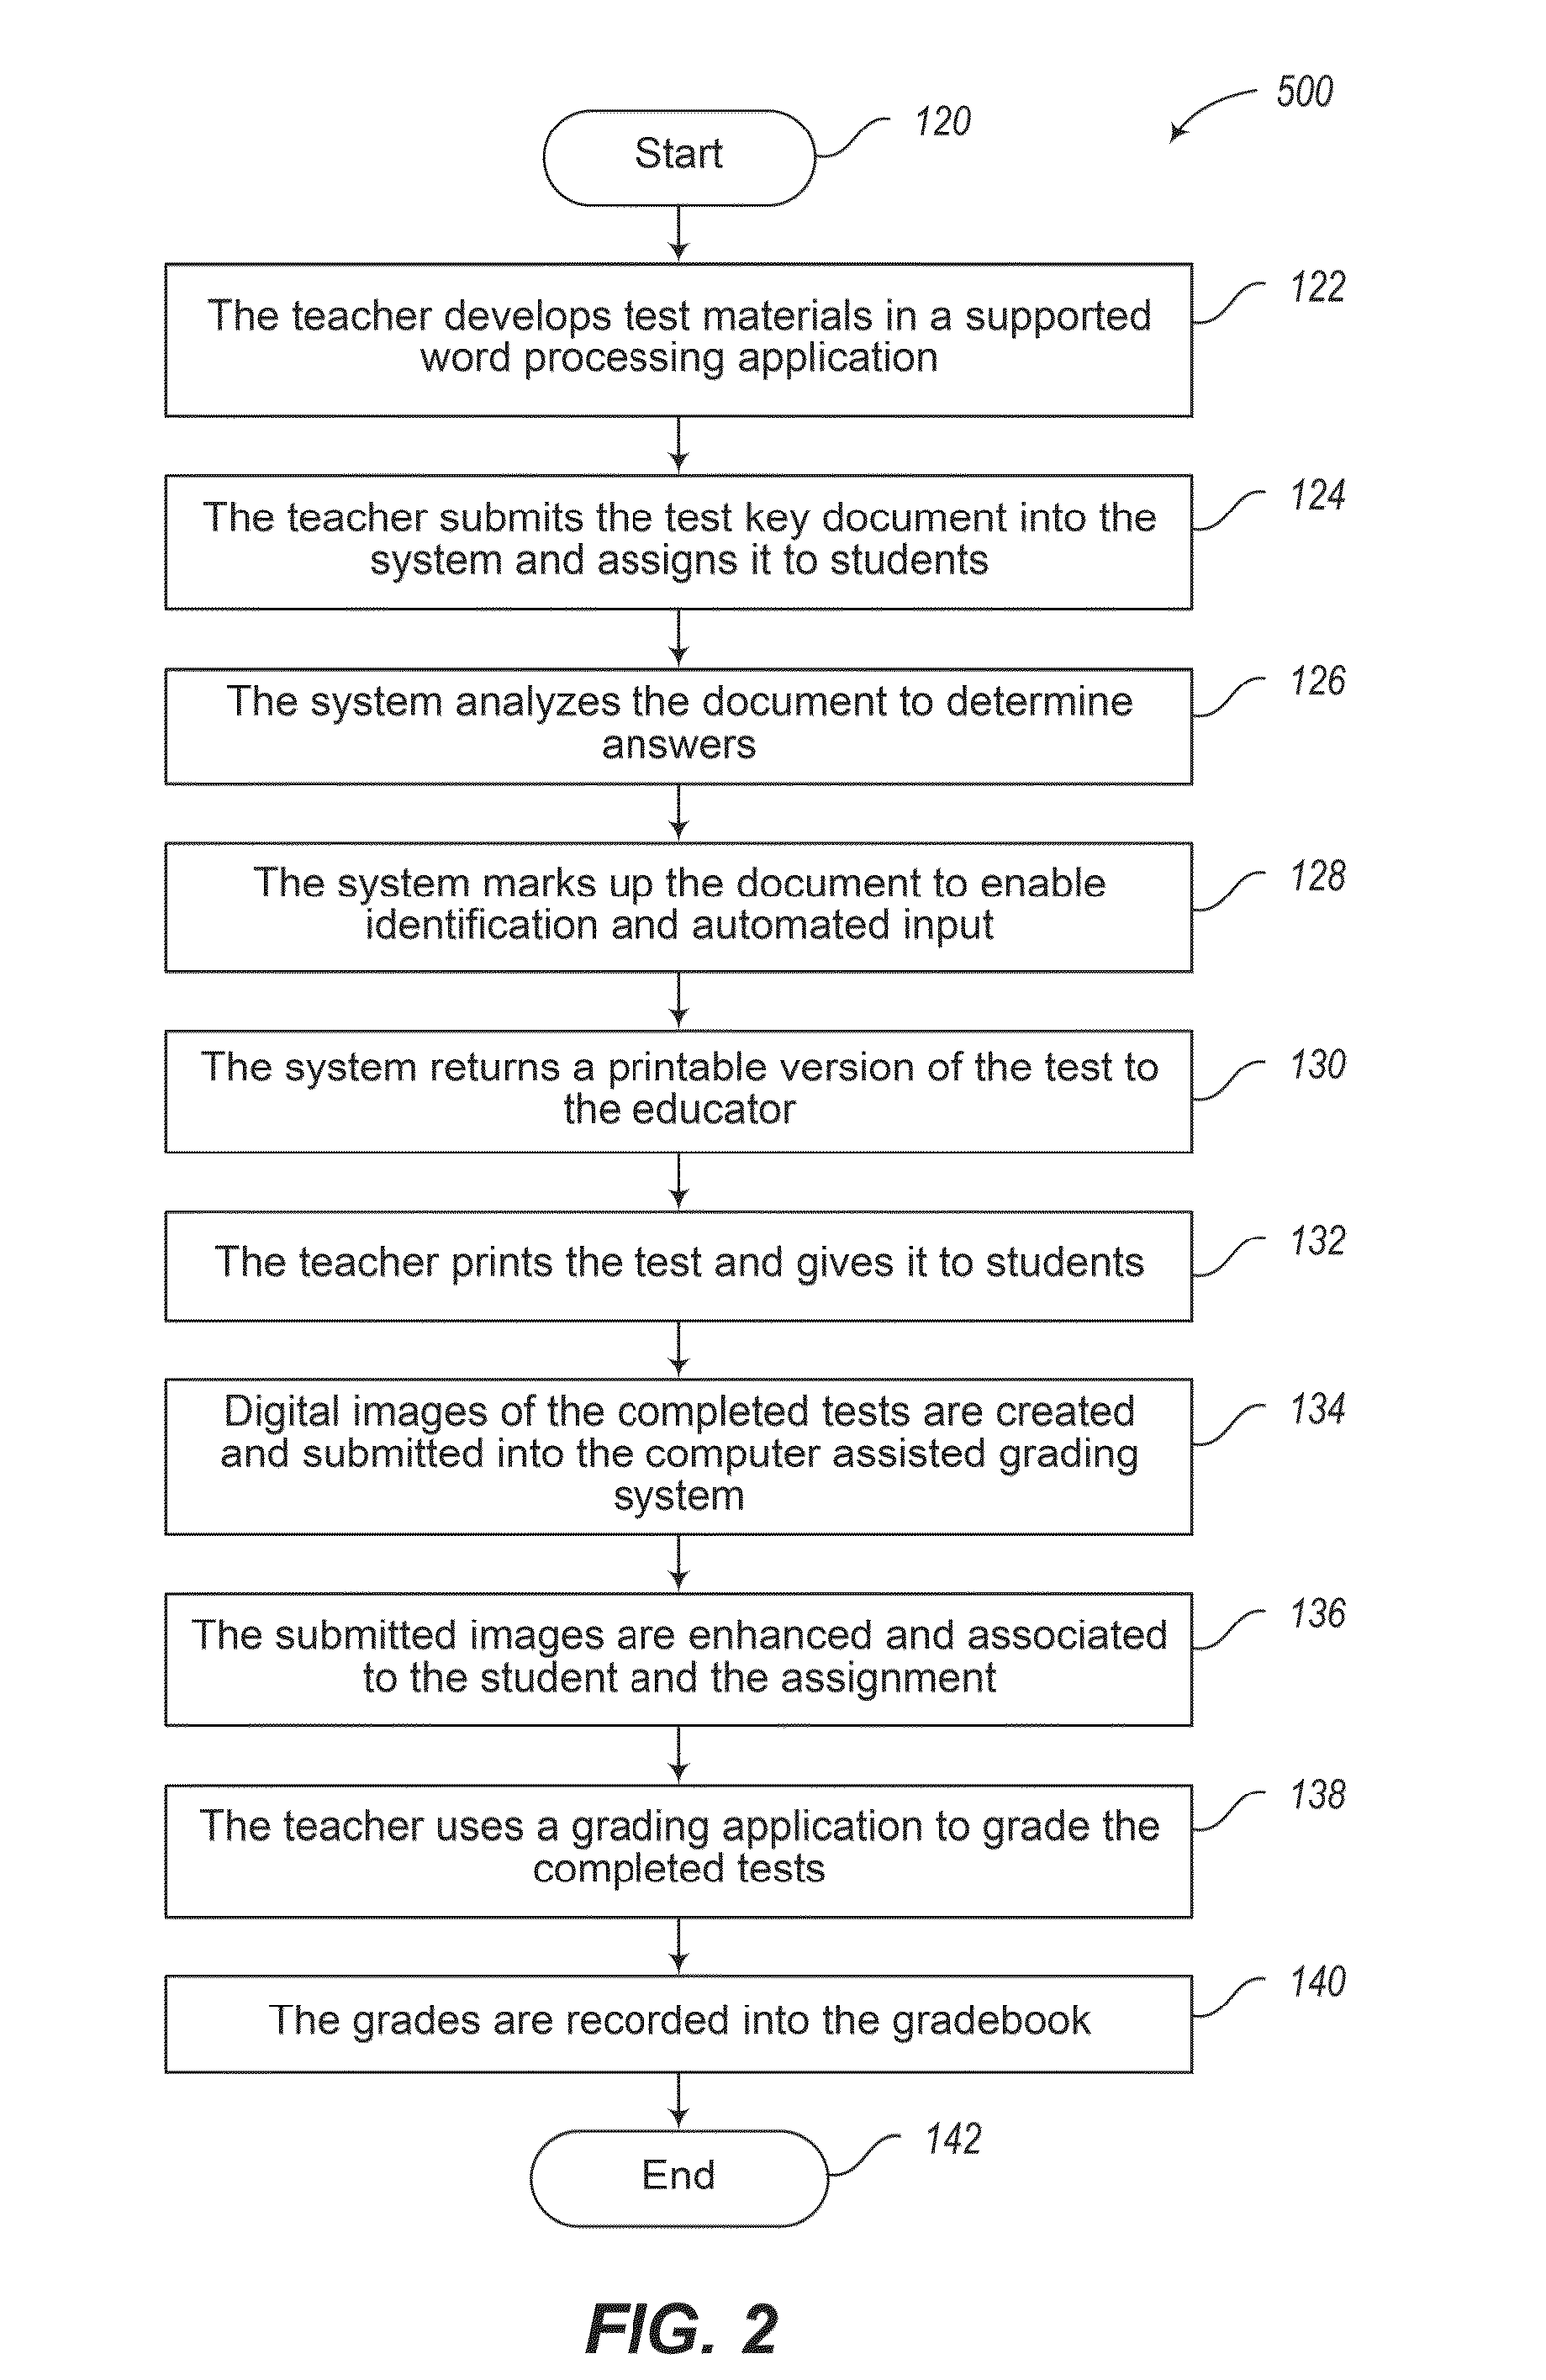 Systems and methods for computer-assisted grading of printed tests